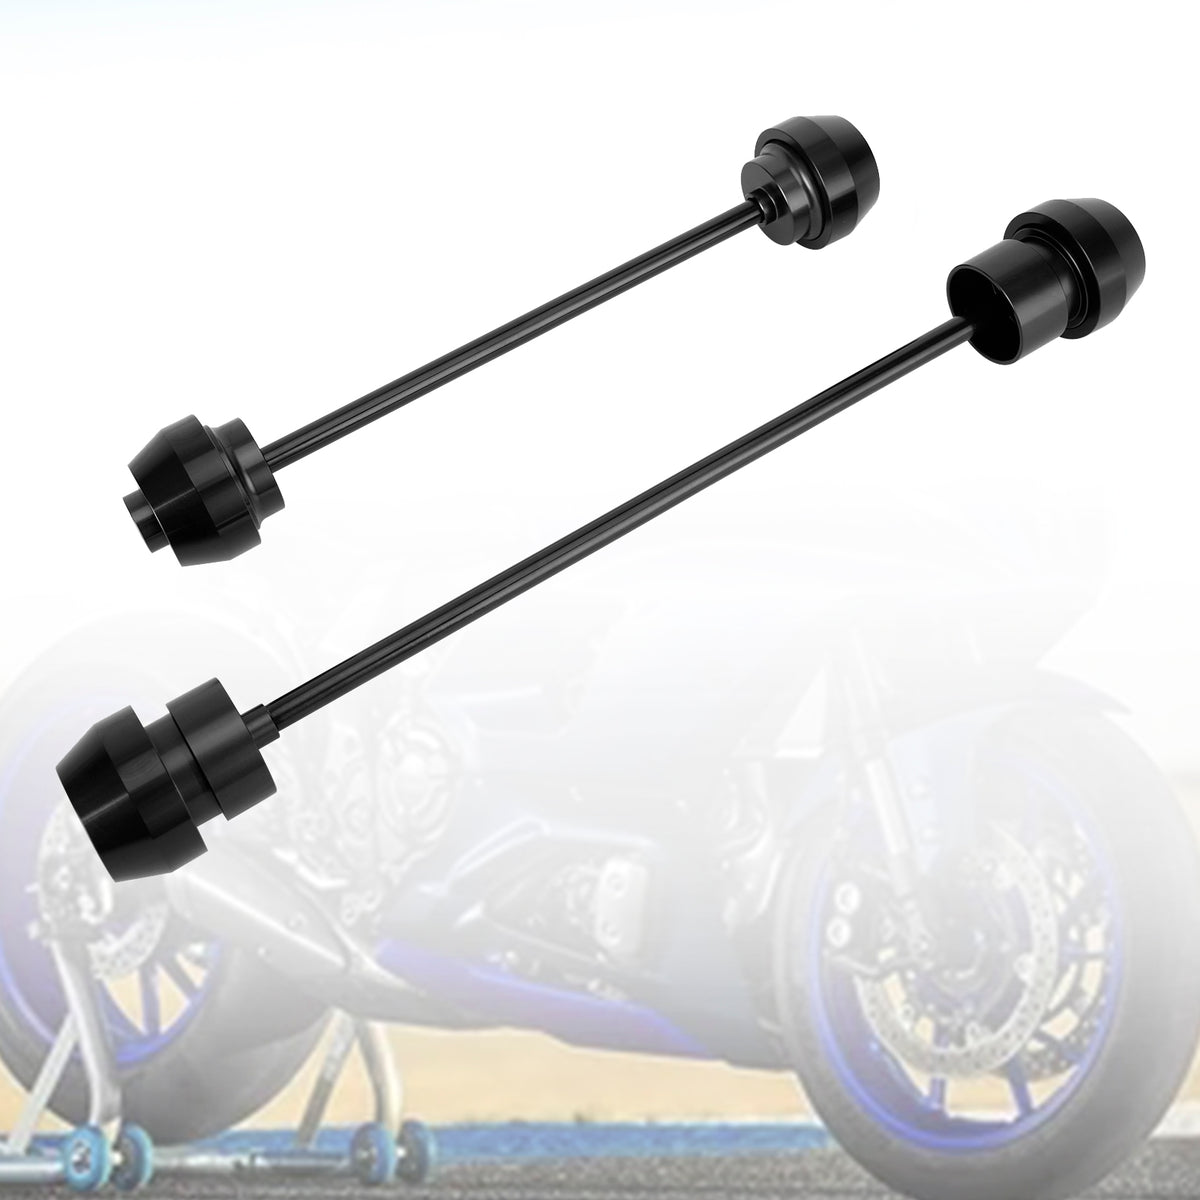 21-23 Yamaha Yzf-R7 Yzf R7 Asse anteriore + posteriore Forcella Slider ruota Cnc